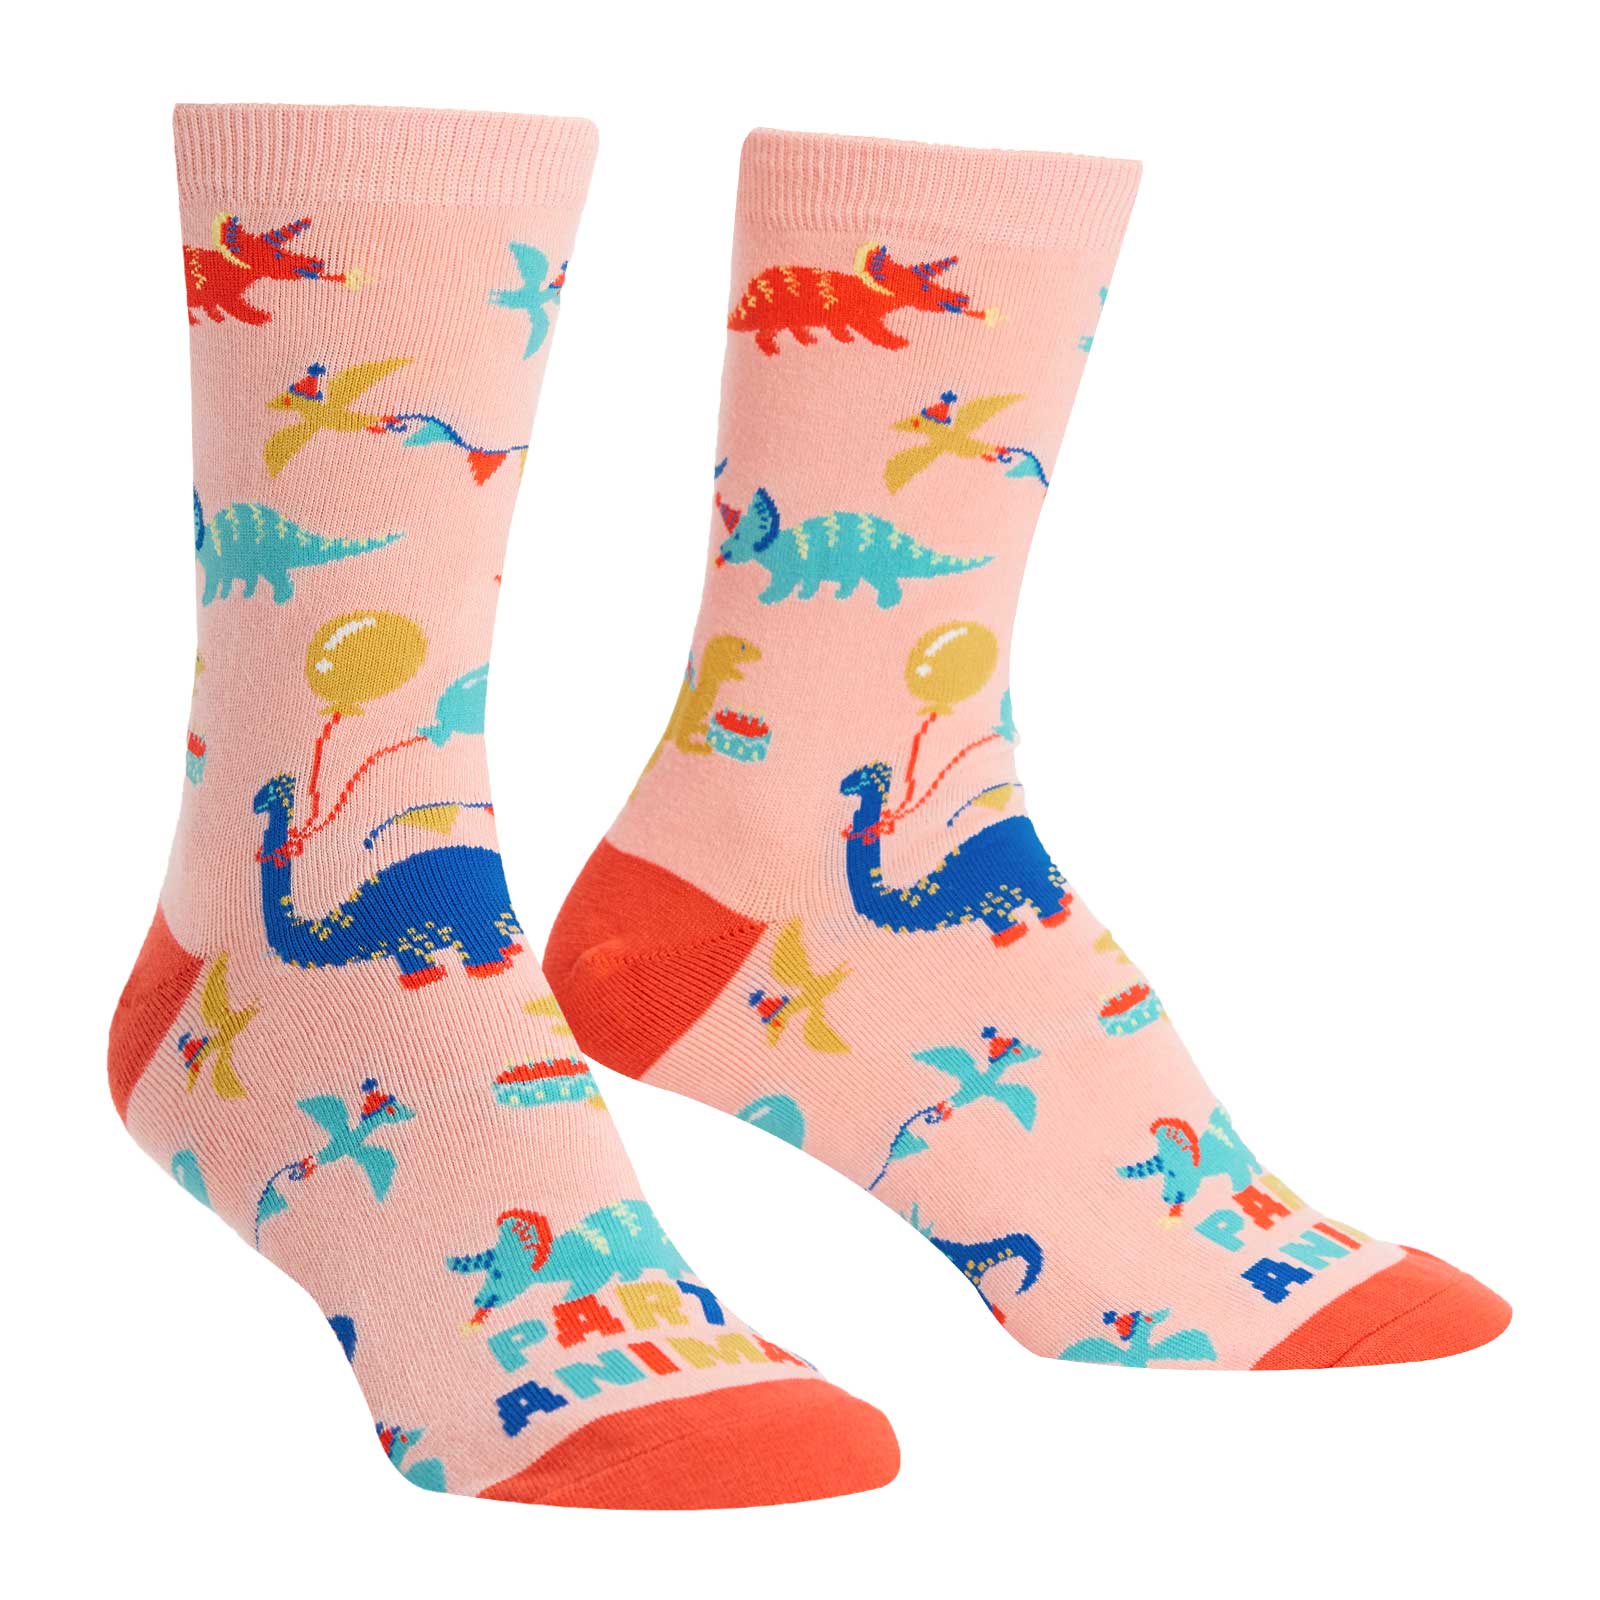 Cute dinosaurs celebrate on these women's birthday socks that say, "Party On"